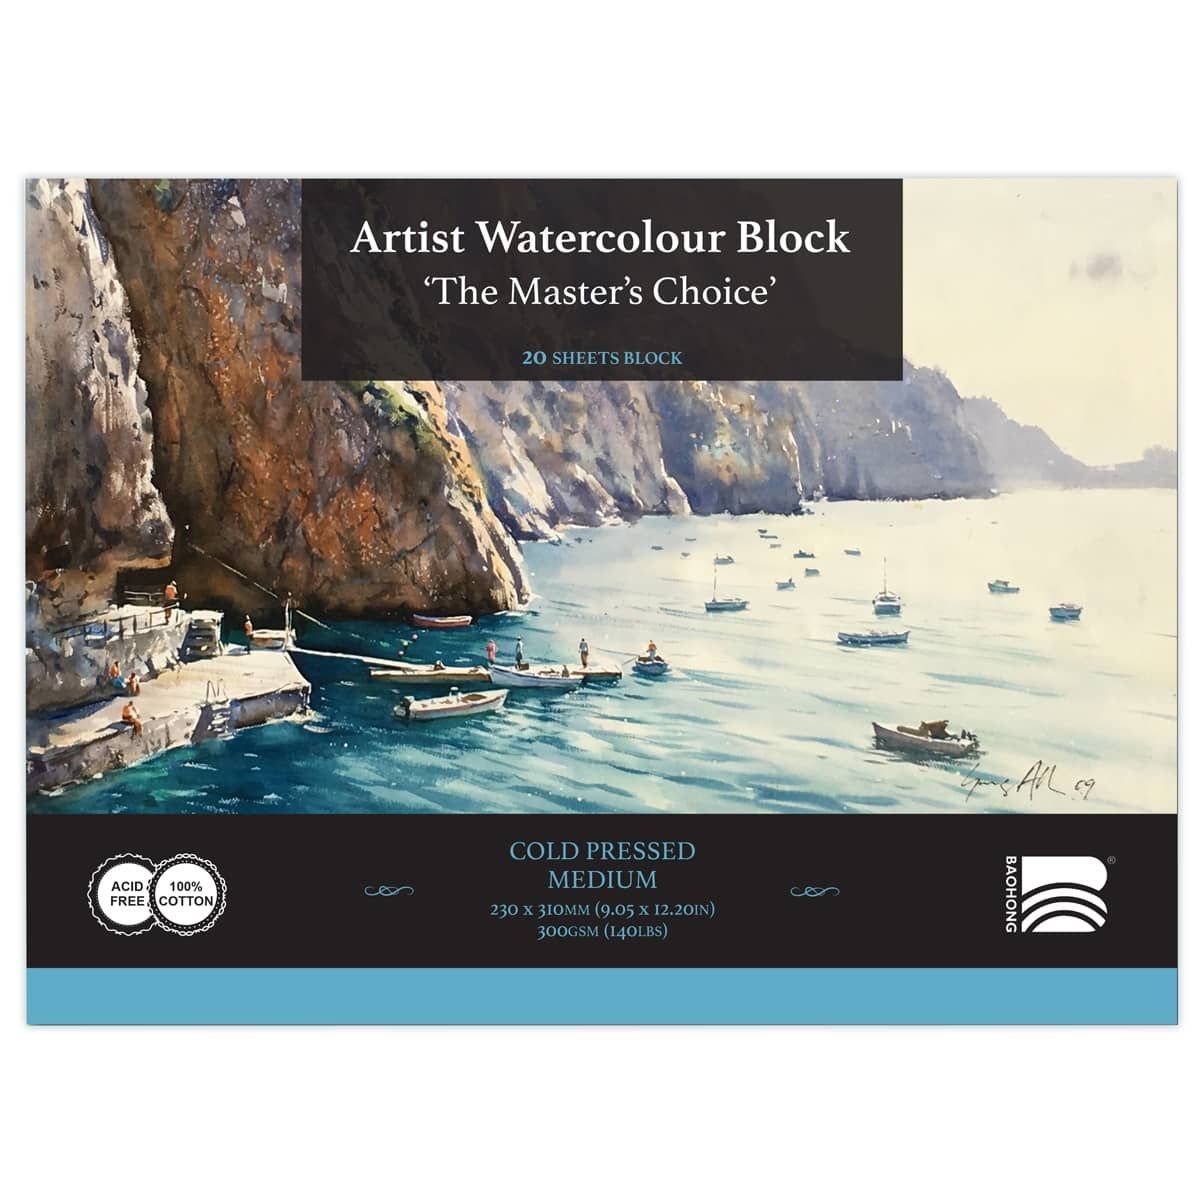 Baohong Artists' Watercolor Paper Block (20 Sheets, Glued on Four Edges), 100% Cotton, Acid-free, 140lb/300gsm, Watercolor Art Supplies for Wet, Dry